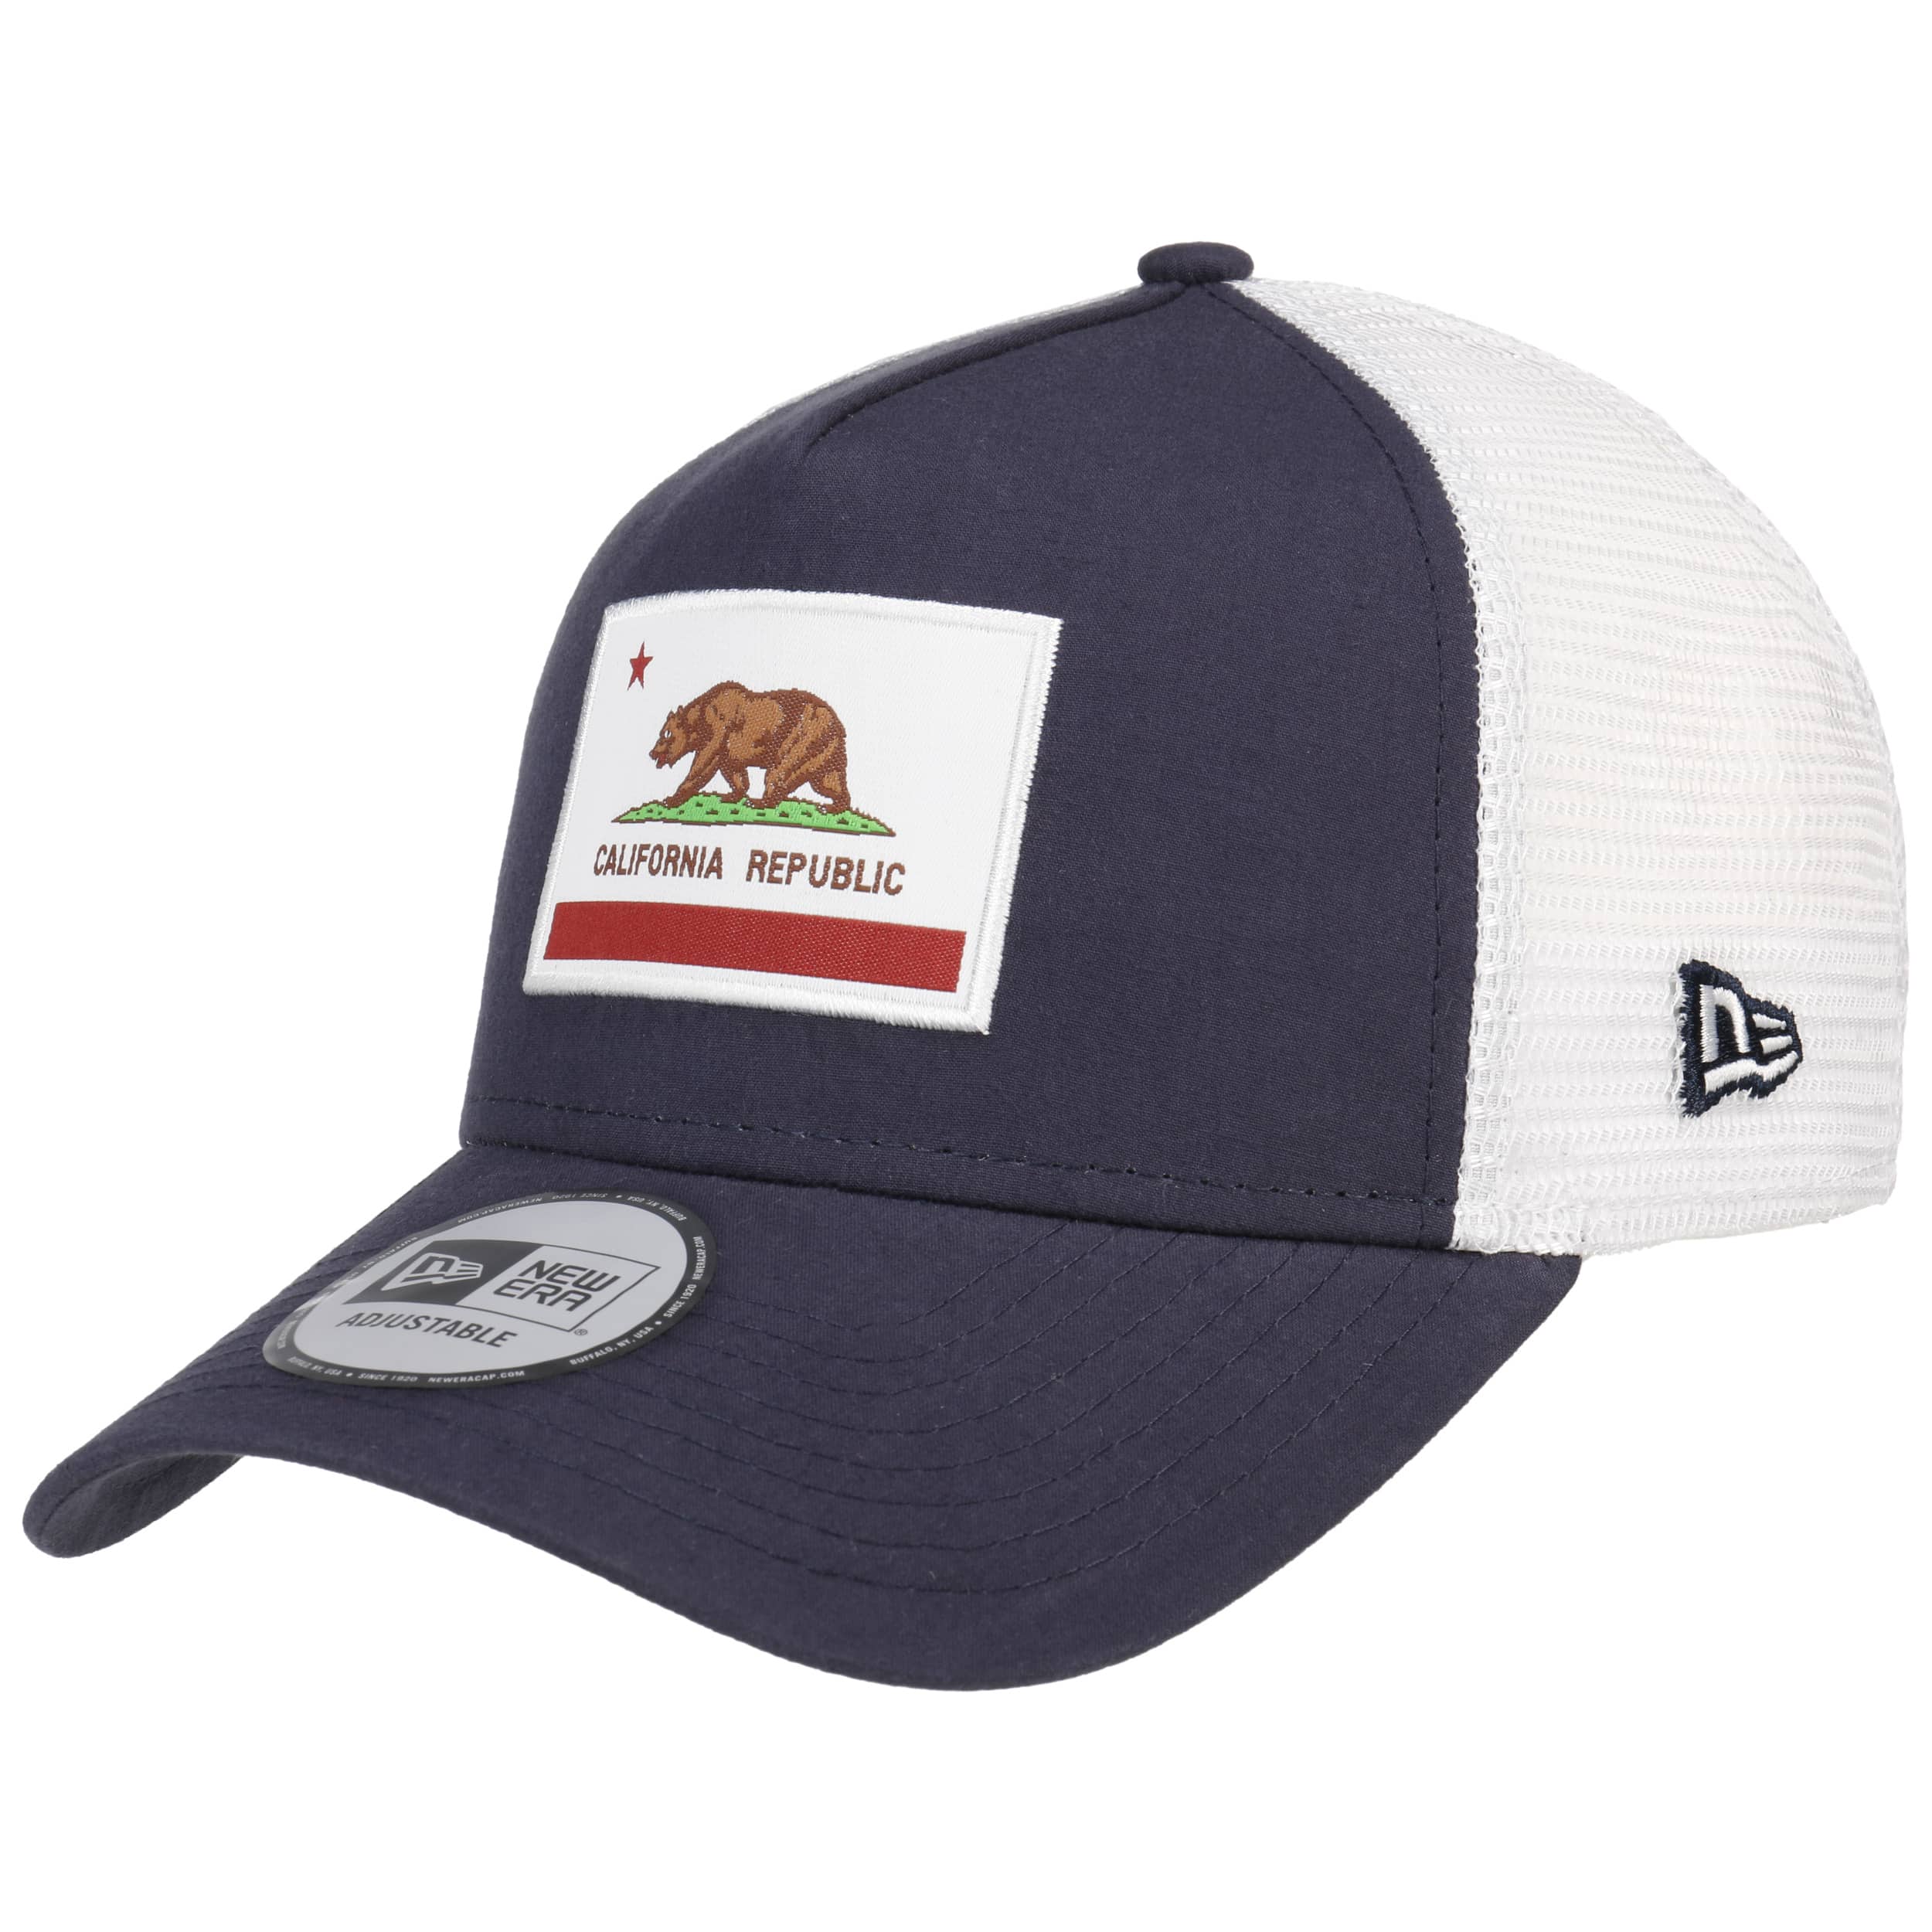 partition interval interior US State Trucker Cap by New Era - 22,95 €